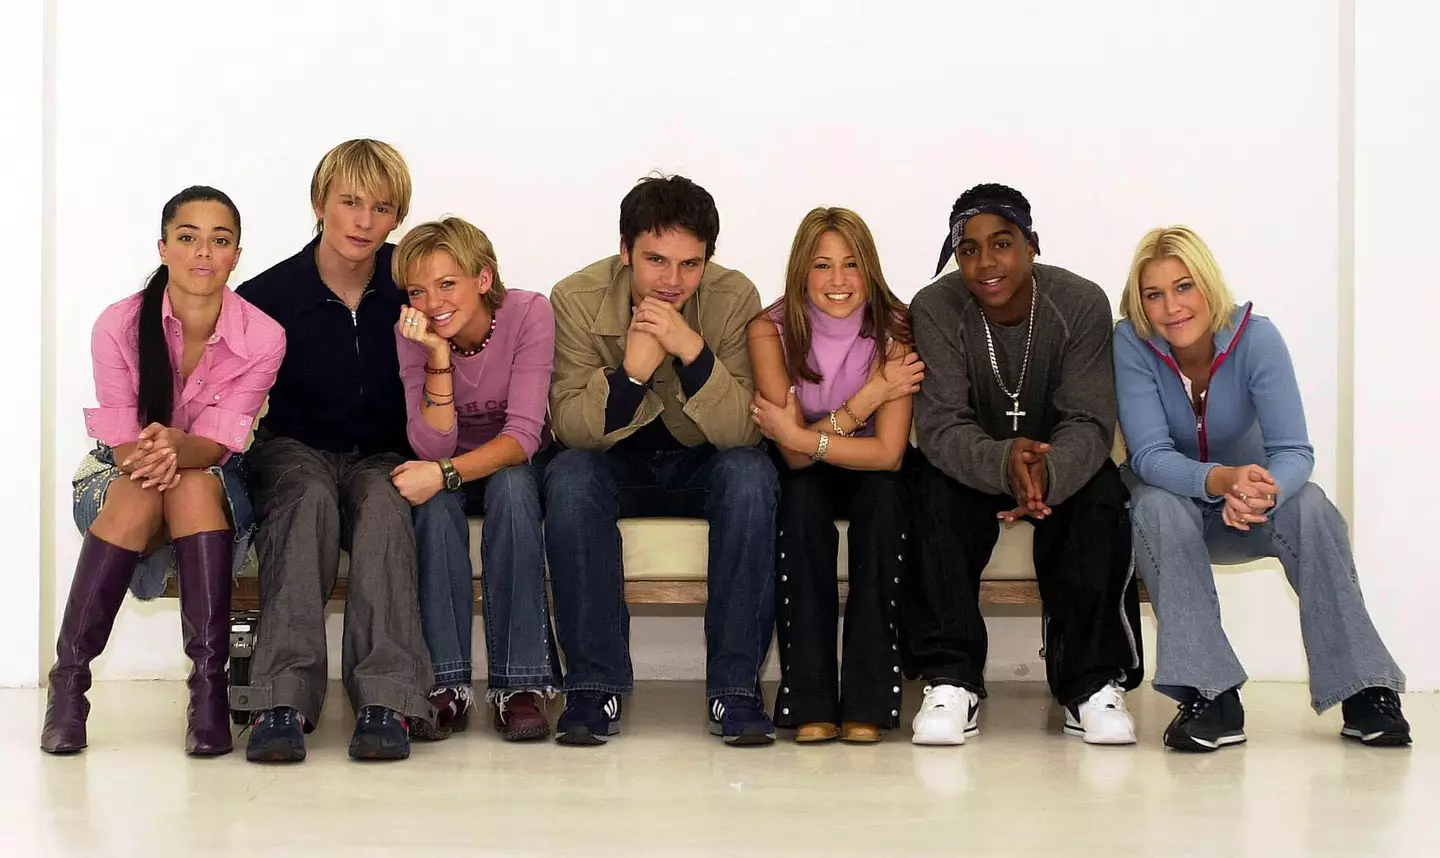 S Club 7 announced their 25th anniversary tour across the UK and Ireland.